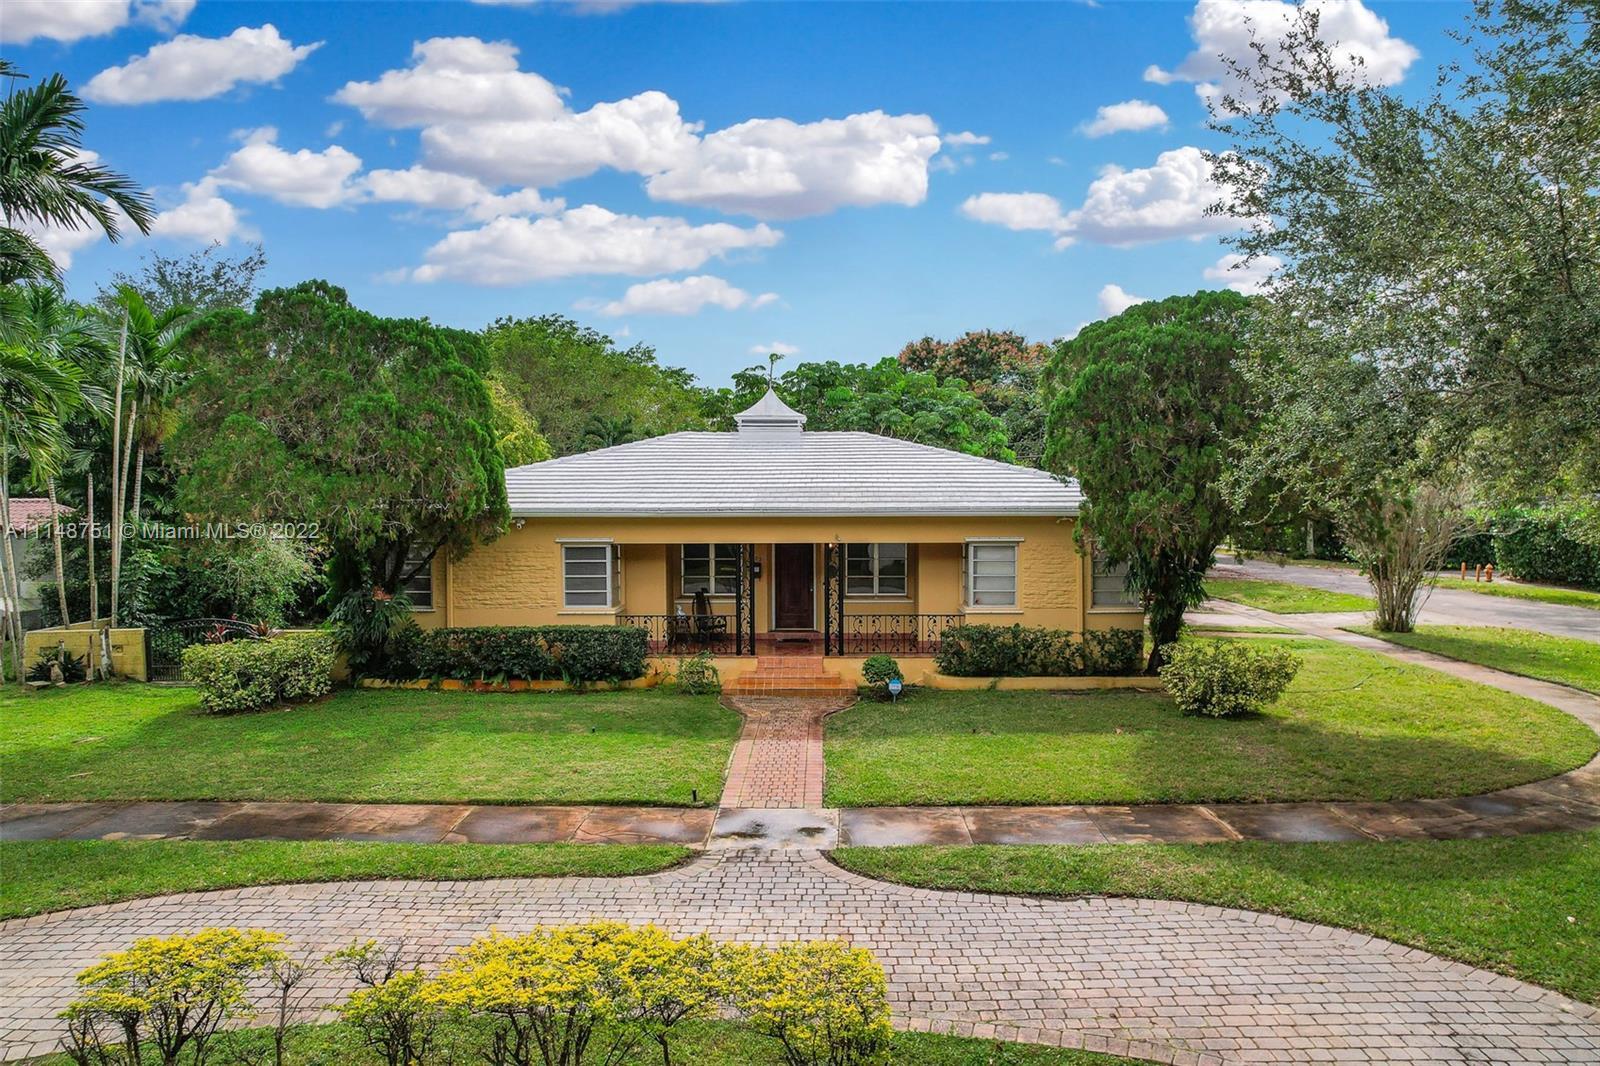 Prime location This 2608 sq ft corner home is located in the sought-after neighborhood of Miami Shor